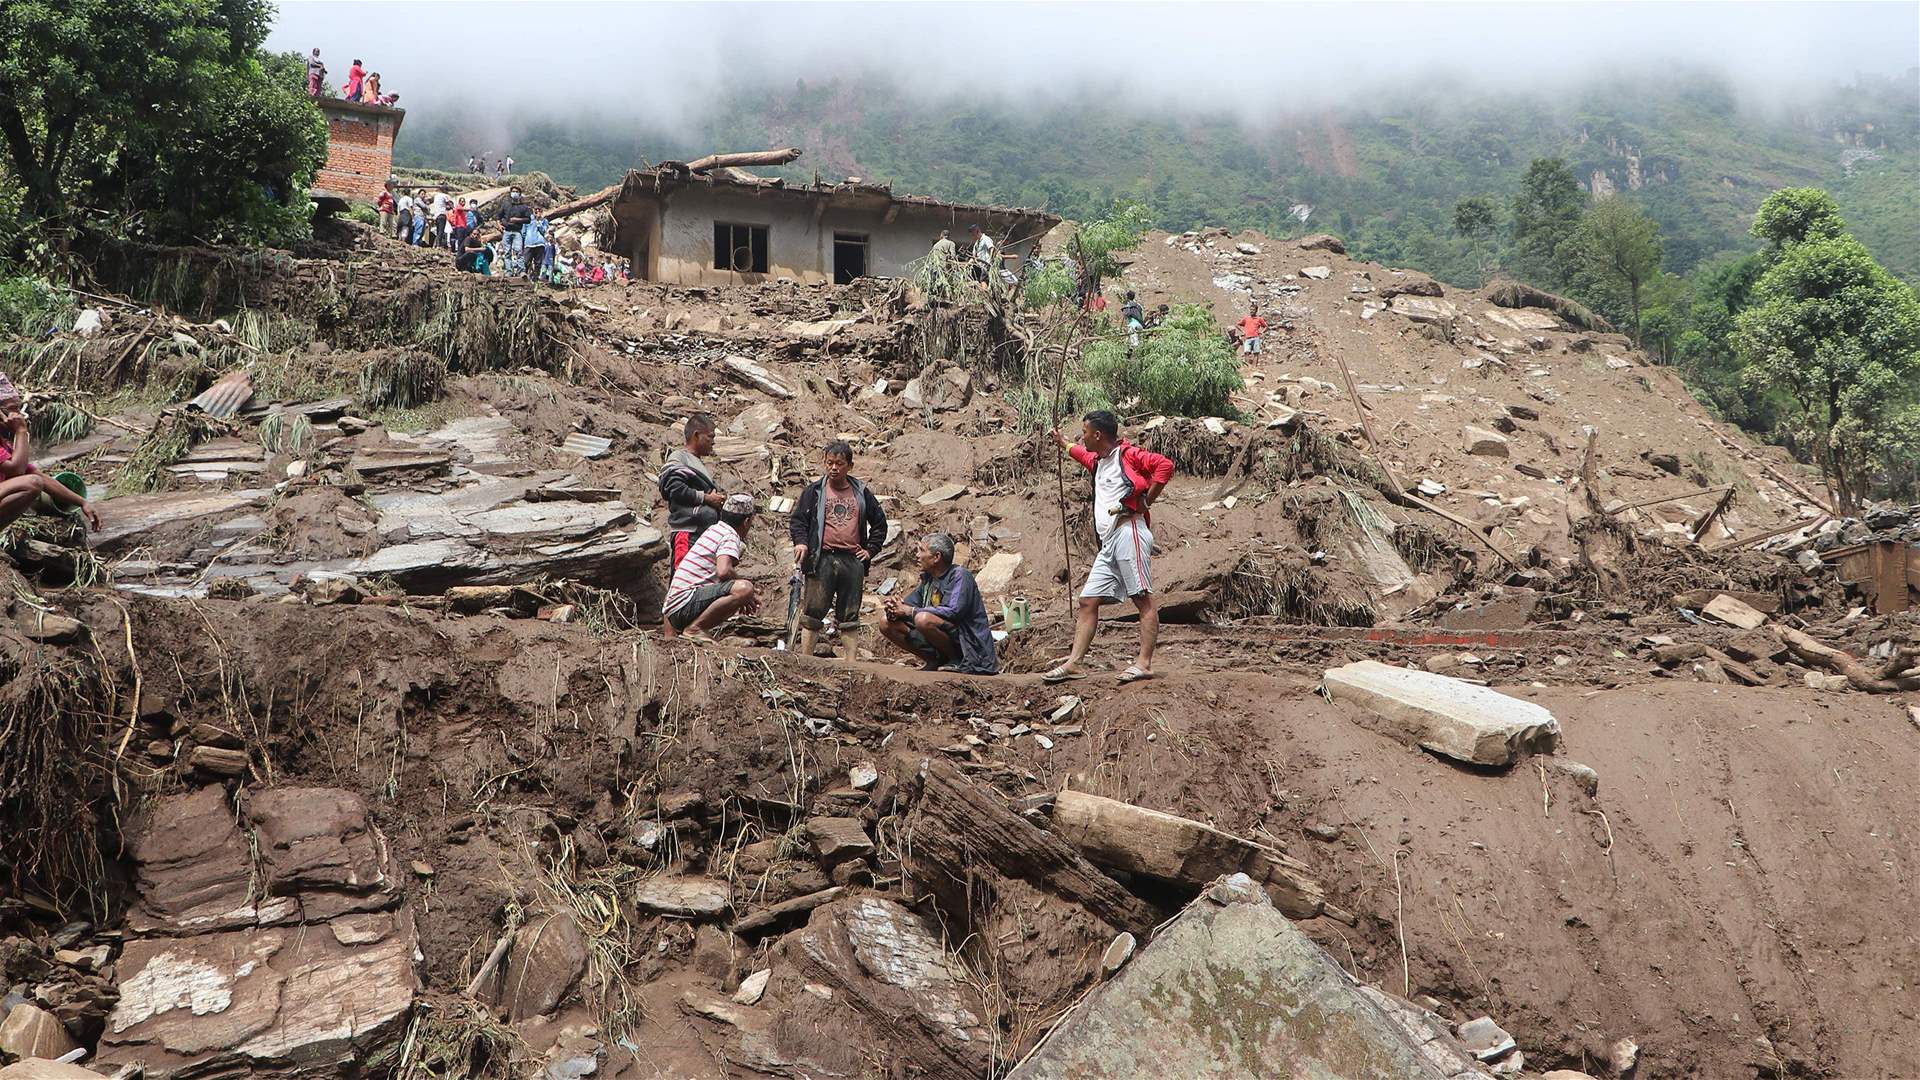 66 missing in Nepal after landslide sweeps two buses into river